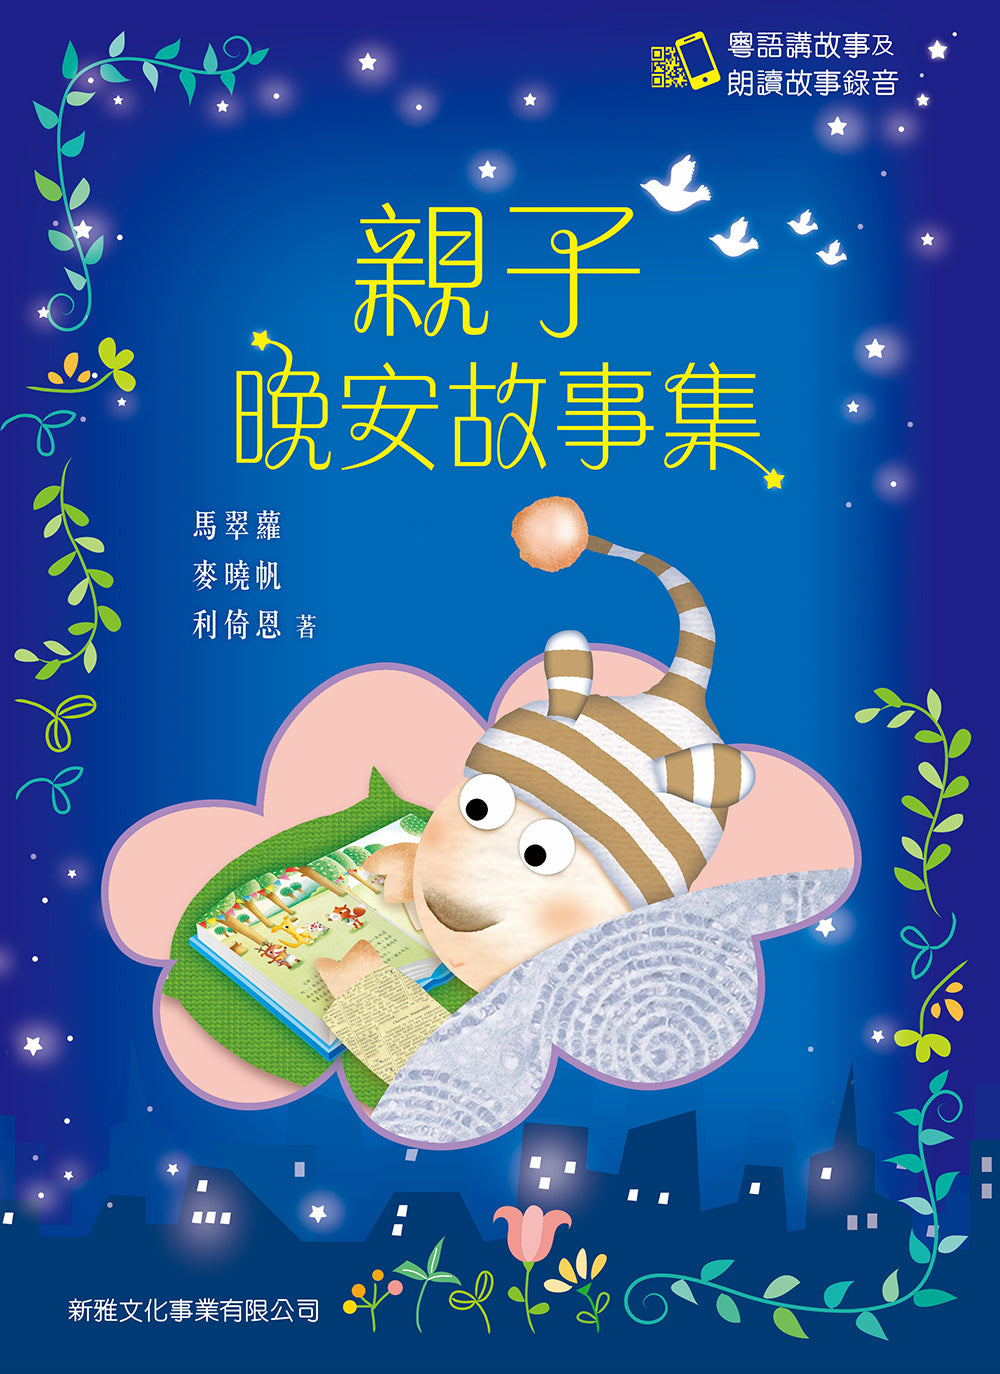 Bedtime Stories with Cantonese Audio #1 • 親子晚安故事集 1